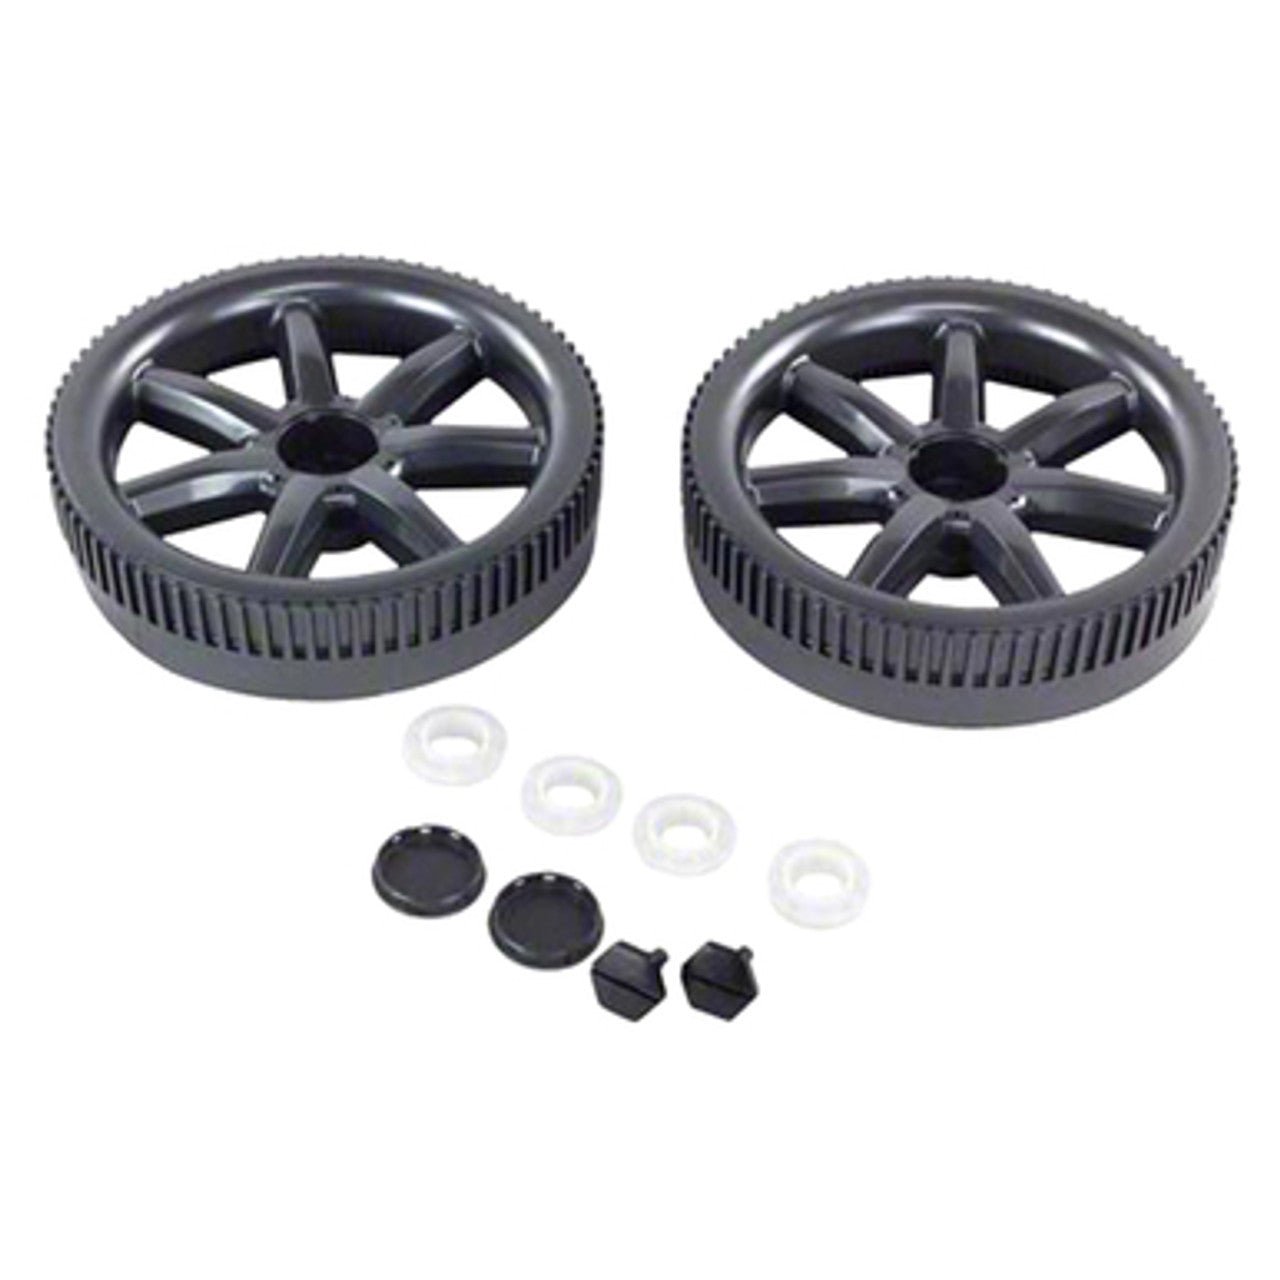 Pentair Small Wheel Kit for Racer Pressure Side Cleaner 360236 - Cleaner Parts - img-1